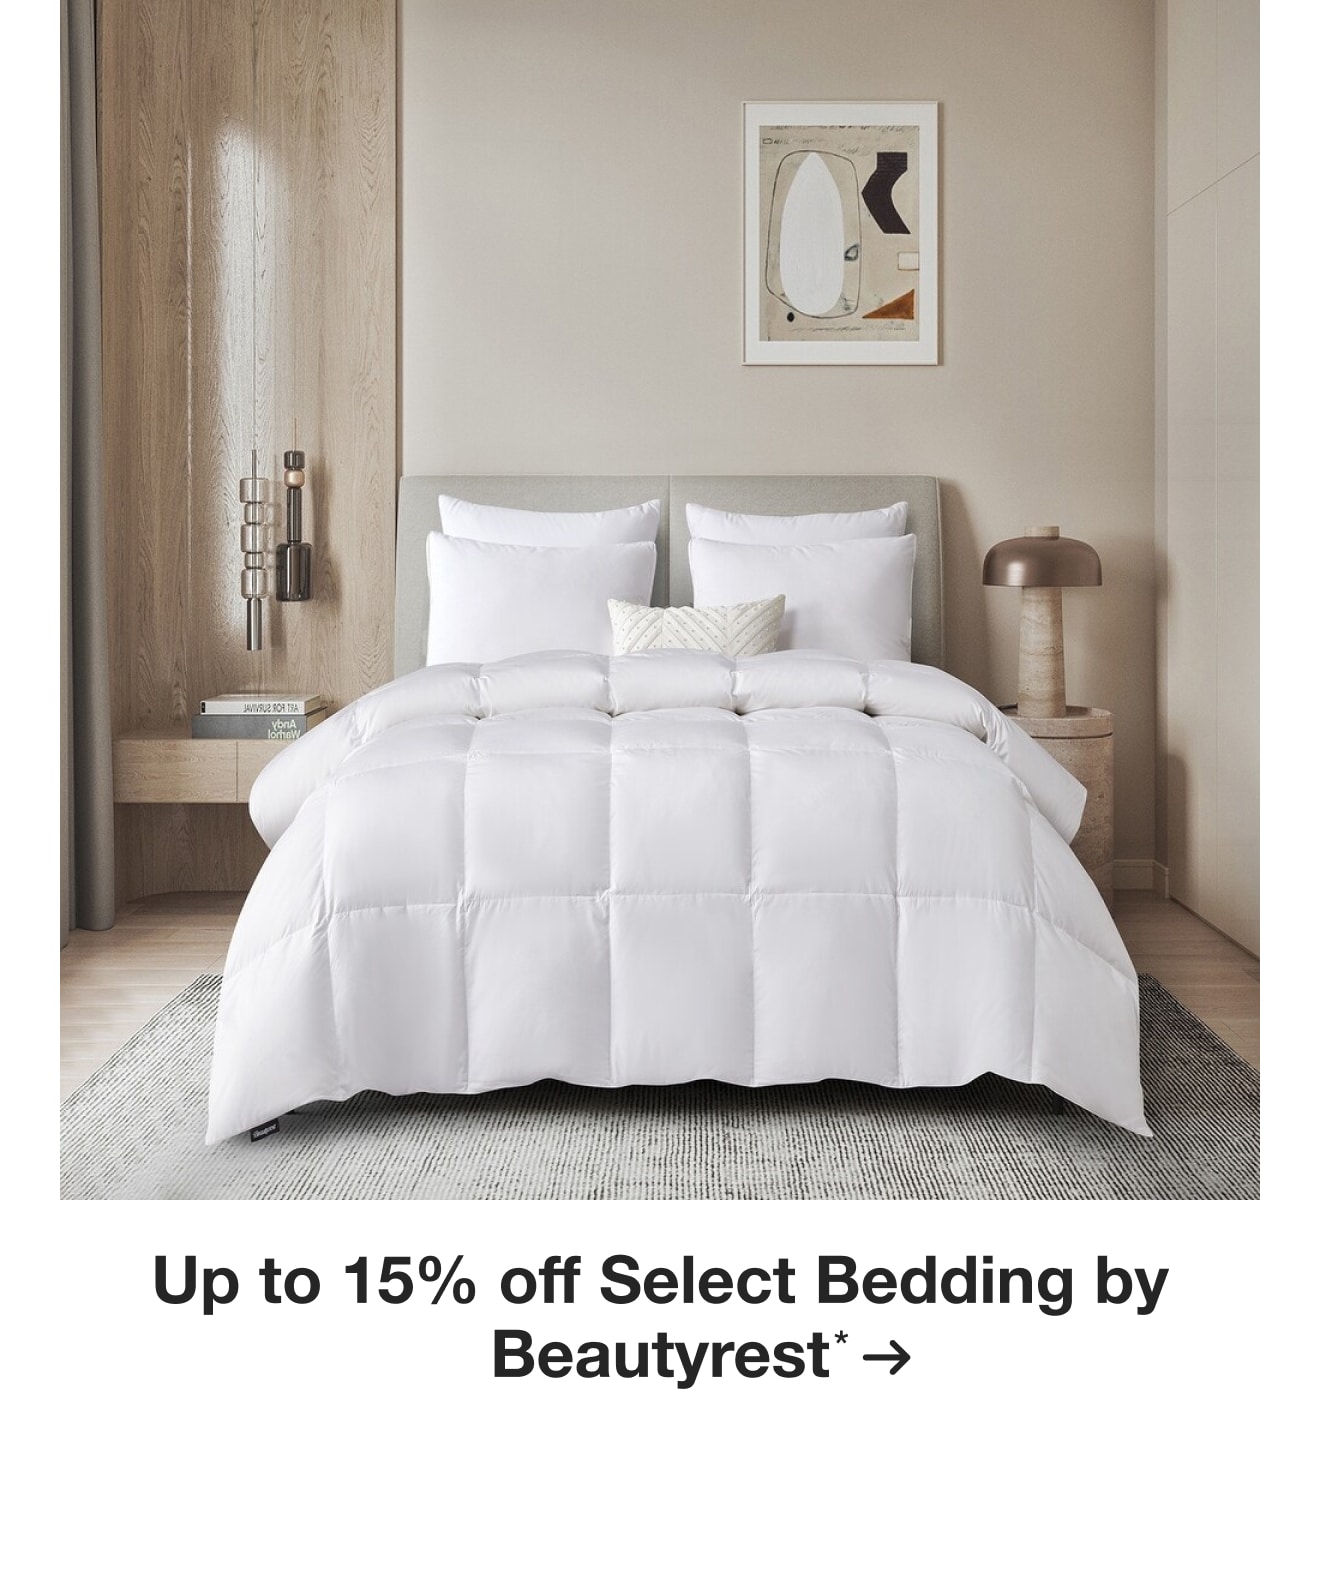 up to 15% off Select Bedding by Beautyrest*